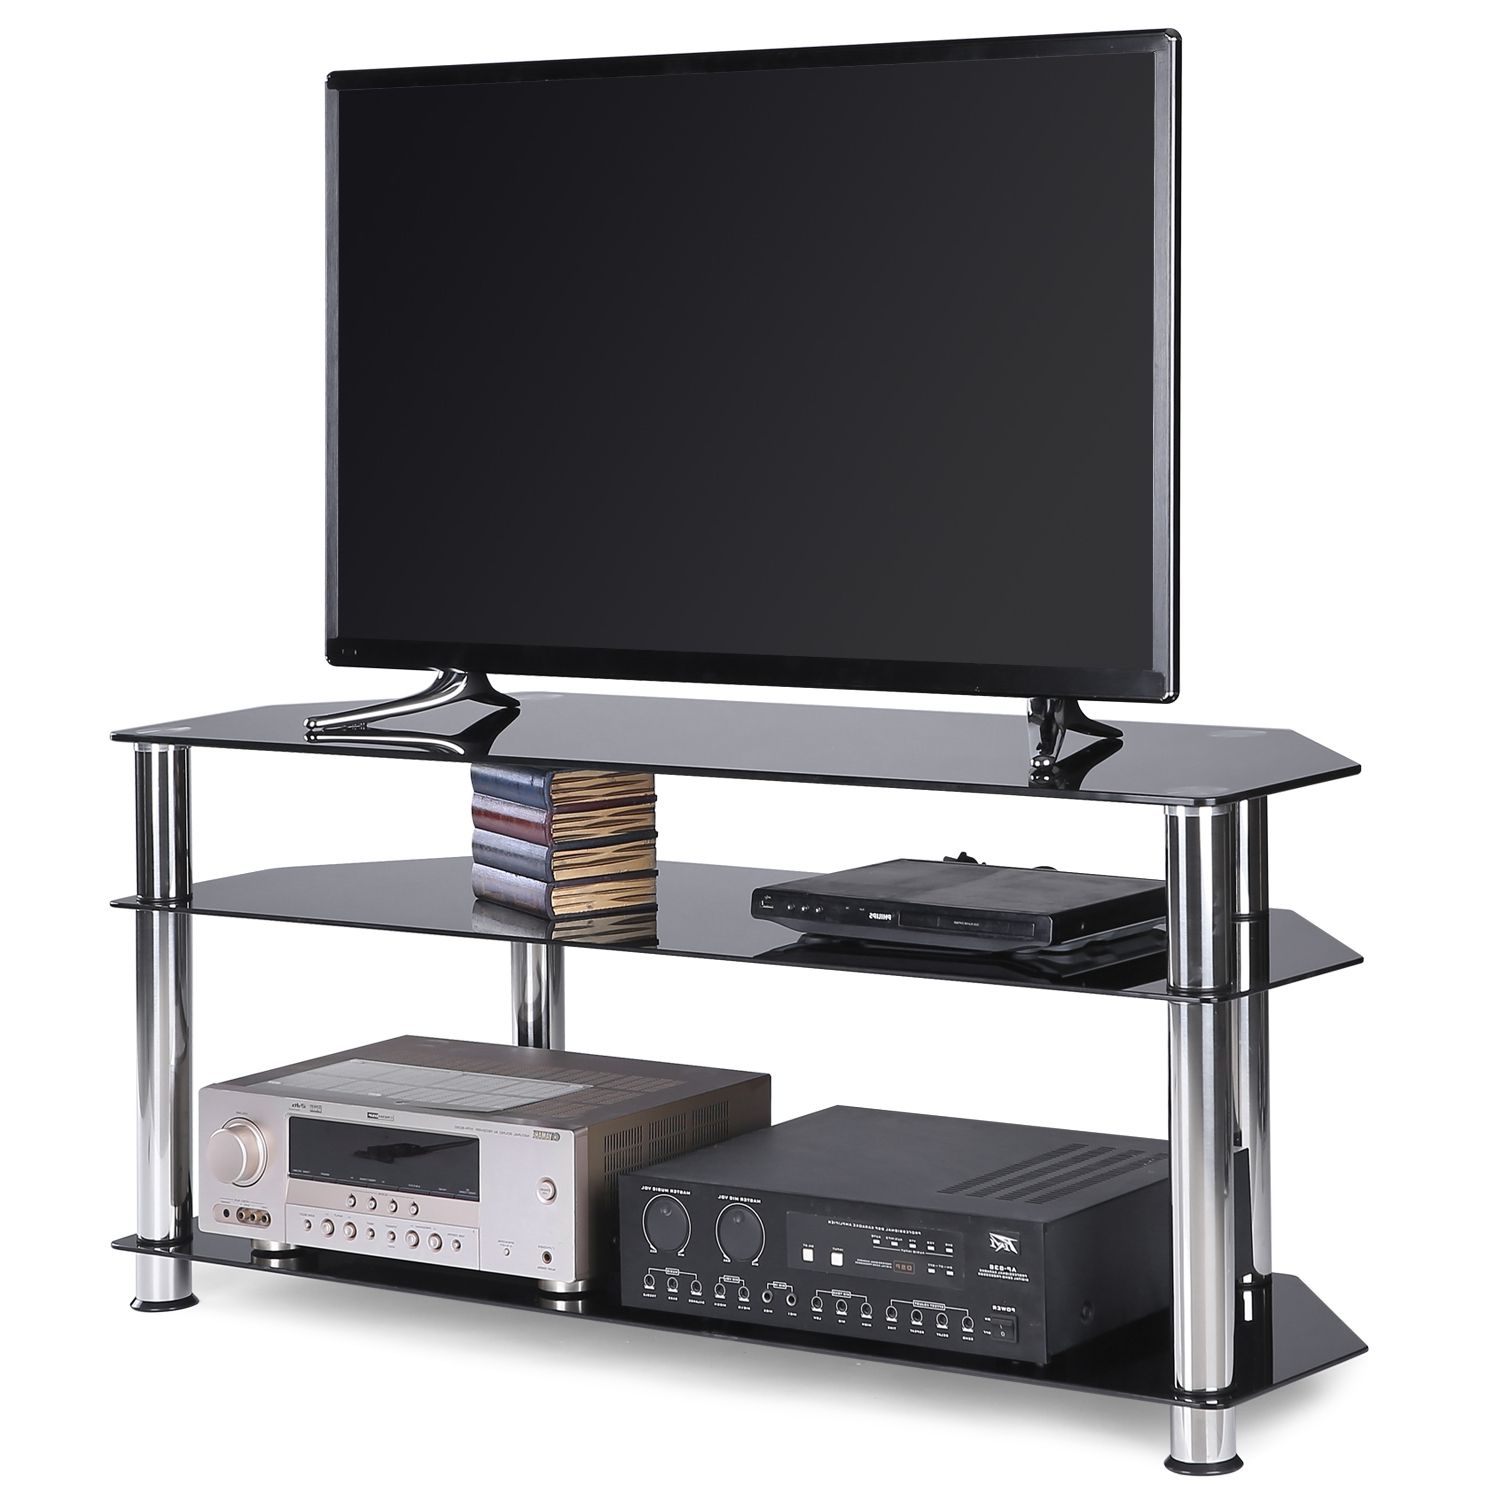 Contemporary Black Corner Glass Tv Stand For Tvs Up To 55 With Regard To Sahika Tv Stands For Tvs Up To 55" (View 5 of 20)